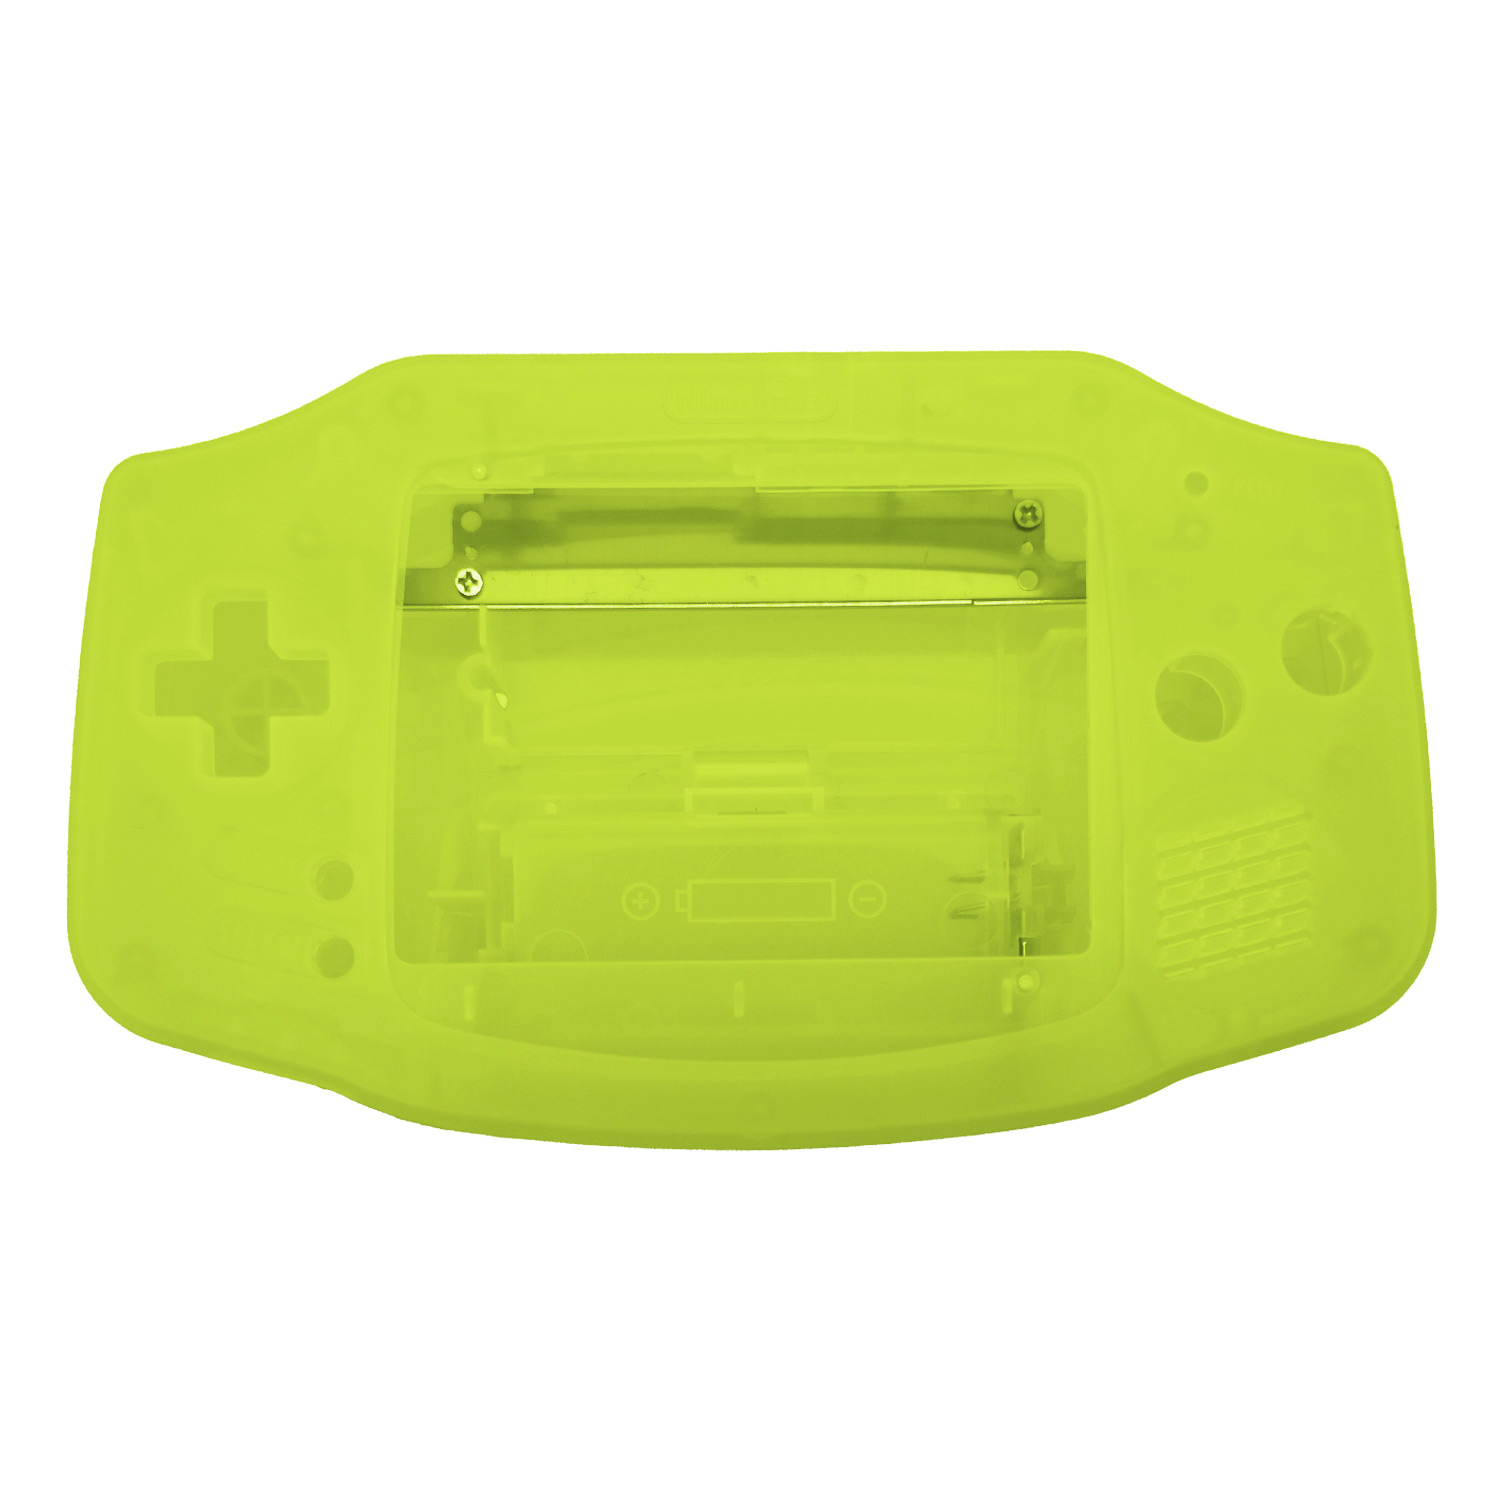 Game Boy Advance Shell (Yellow Clear) - SALE